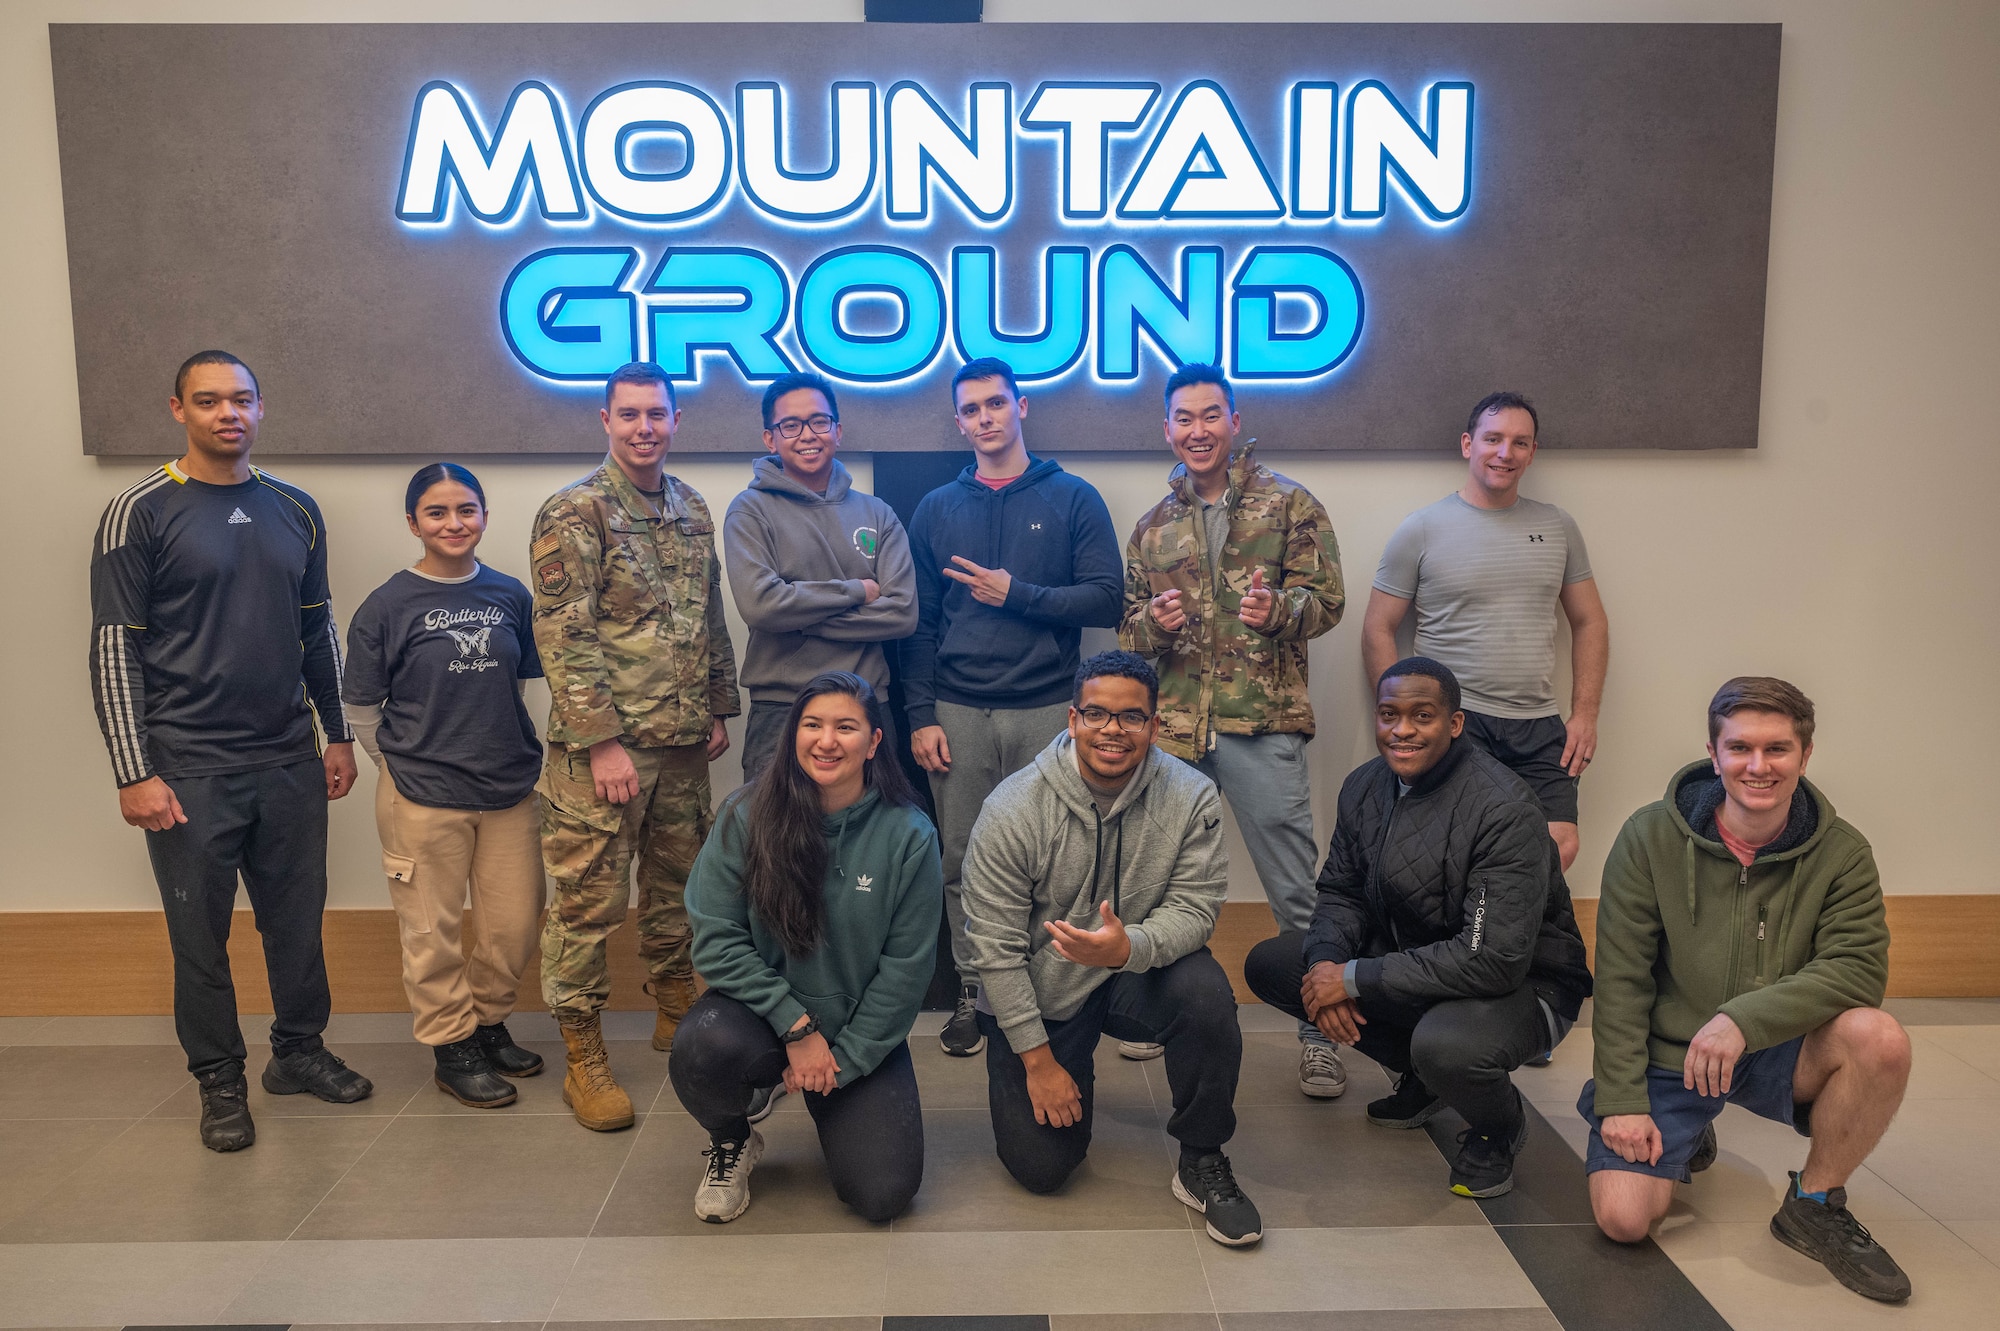 U.S. Air Force Airmen from the 51st Fighter Wing pose for a group photo after a resilience building event at the Mountain Ground rock climbing gym in Dongtan-Daero, Republic of Korea, Dec. 15, 2023. The event served as a facilitator for discussion on how to become more resilient, and how Airmen could build a support system to help them as they set goals and develop professionally. (U.S. Air Force photo by Airman 1st Class Chase Verzaal)